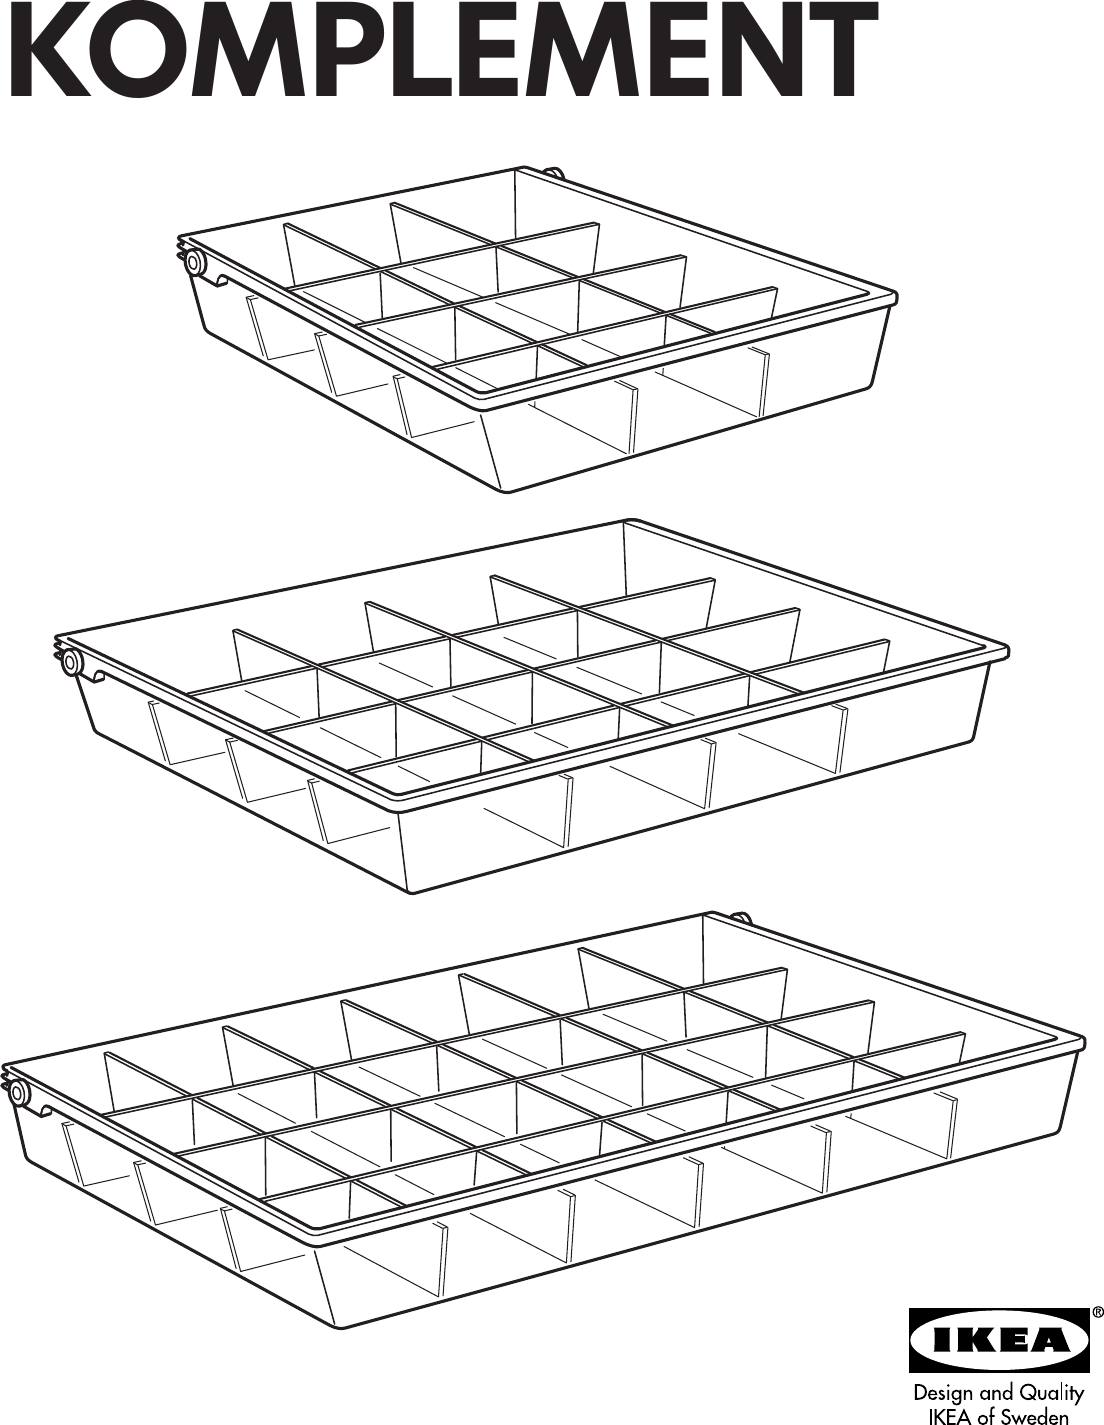 Page 1 of 4 - Ikea Ikea-Komplement-Storage-W-Compartments-Assembly-Instruction